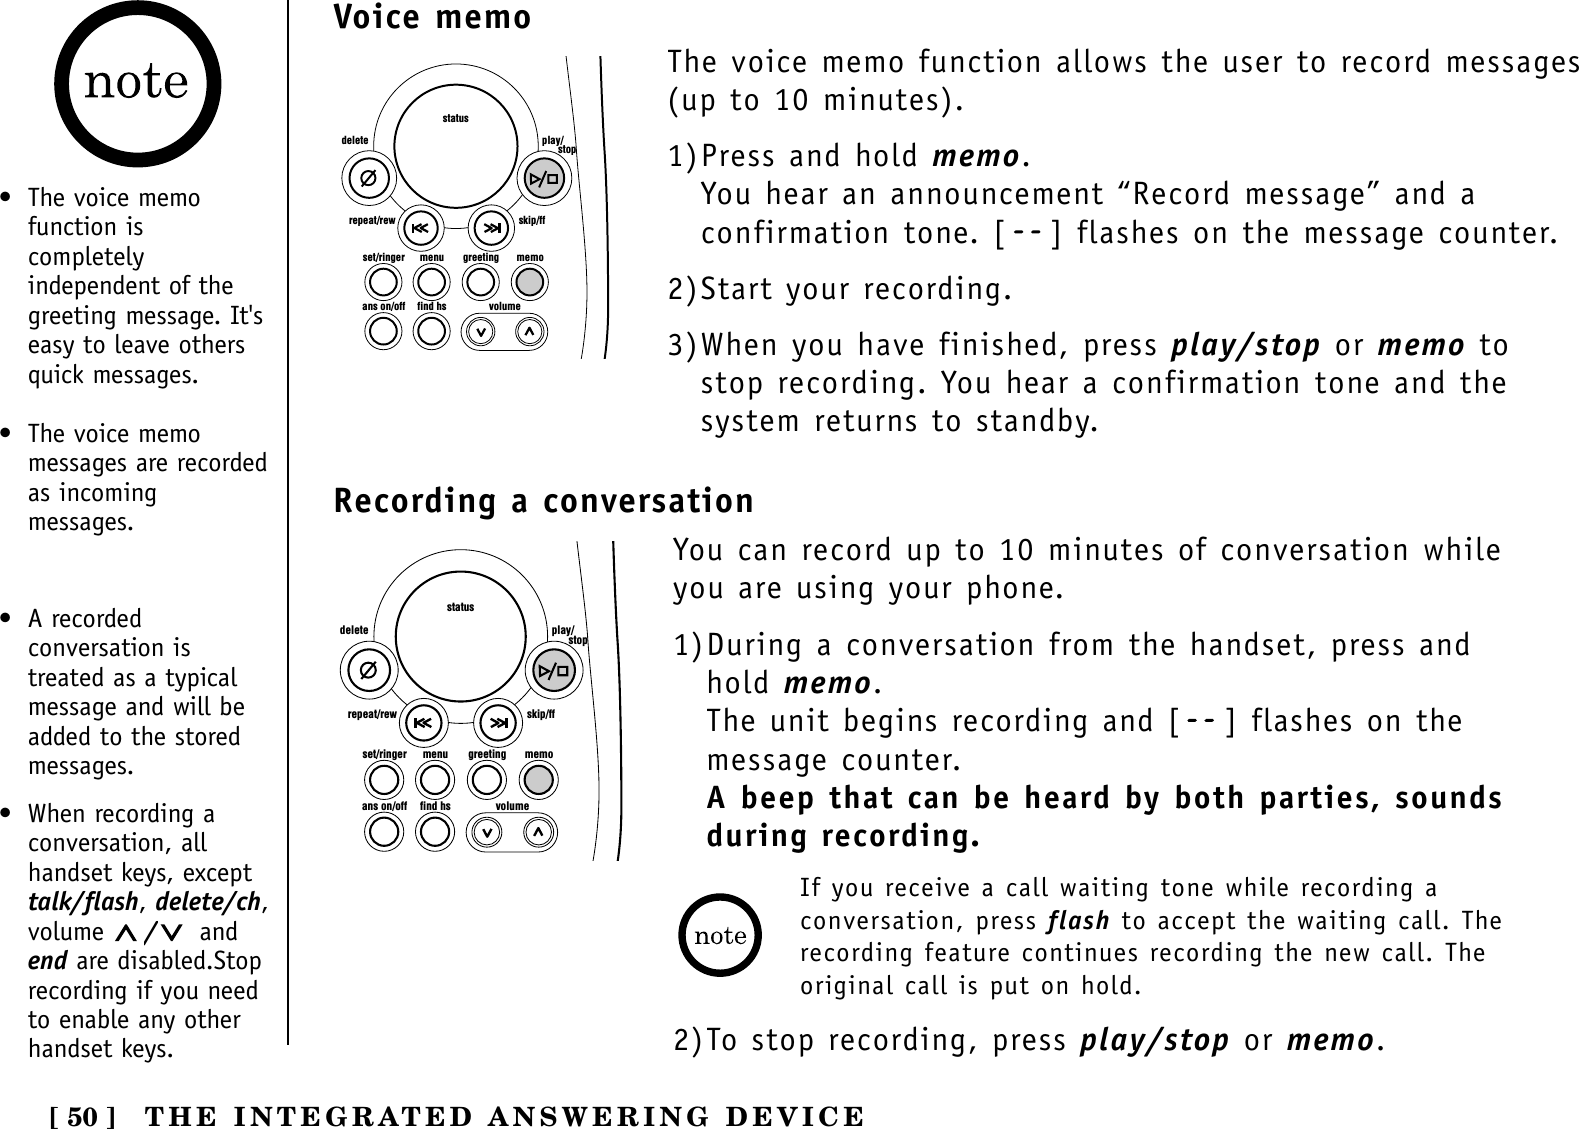 [ 50 ]set/ringer menuans on/off find hs volumegreeting memoskip/ffrepeat/rewdelete play/      stopstatusVoice memo• The voice memofunction iscompletelyindependent of thegreeting message. It&apos;seasy to leave othersquick messages.• The voice memomessages are recordedas incomingmessages.The voice memo function allows the user to record messages(up to 10 minutes).1)Press and hold memo. You hear an announcement “Record message” and aconfirmation tone. [ ] flashes on the message counter.2)Start your recording.3)When you have finished, press play/stop or memo tostop recording. You hear a confirmation tone and thesystem returns to standby.THE INTEGRATED ANSWERING DEVICERecording a conversationset/ringer menuans on/off find hs volumegreeting memoskip/ffrepeat/rewdelete play/      stopstatusYou can record up to 10 minutes of conversation whileyou are using your phone.1)During a conversation from the handset, press andhold memo. The unit begins recording and [ ] flashes on themessage counter.A beep that can be heard by both parties, sounds during recording.If you receive a call waiting tone while recording aconversation, press flash to accept the waiting call. Therecording feature continues recording the new call. Theoriginal call is put on hold.2)To stop recording, press play/stop or memo.• A recordedconversation istreated as a typicalmessage and will beadded to the storedmessages.• When recording aconversation, allhandset keys, excepttalk/flash, delete/ch,volume  /andend are disabled.Stoprecording if you needto enable any otherhandset keys.